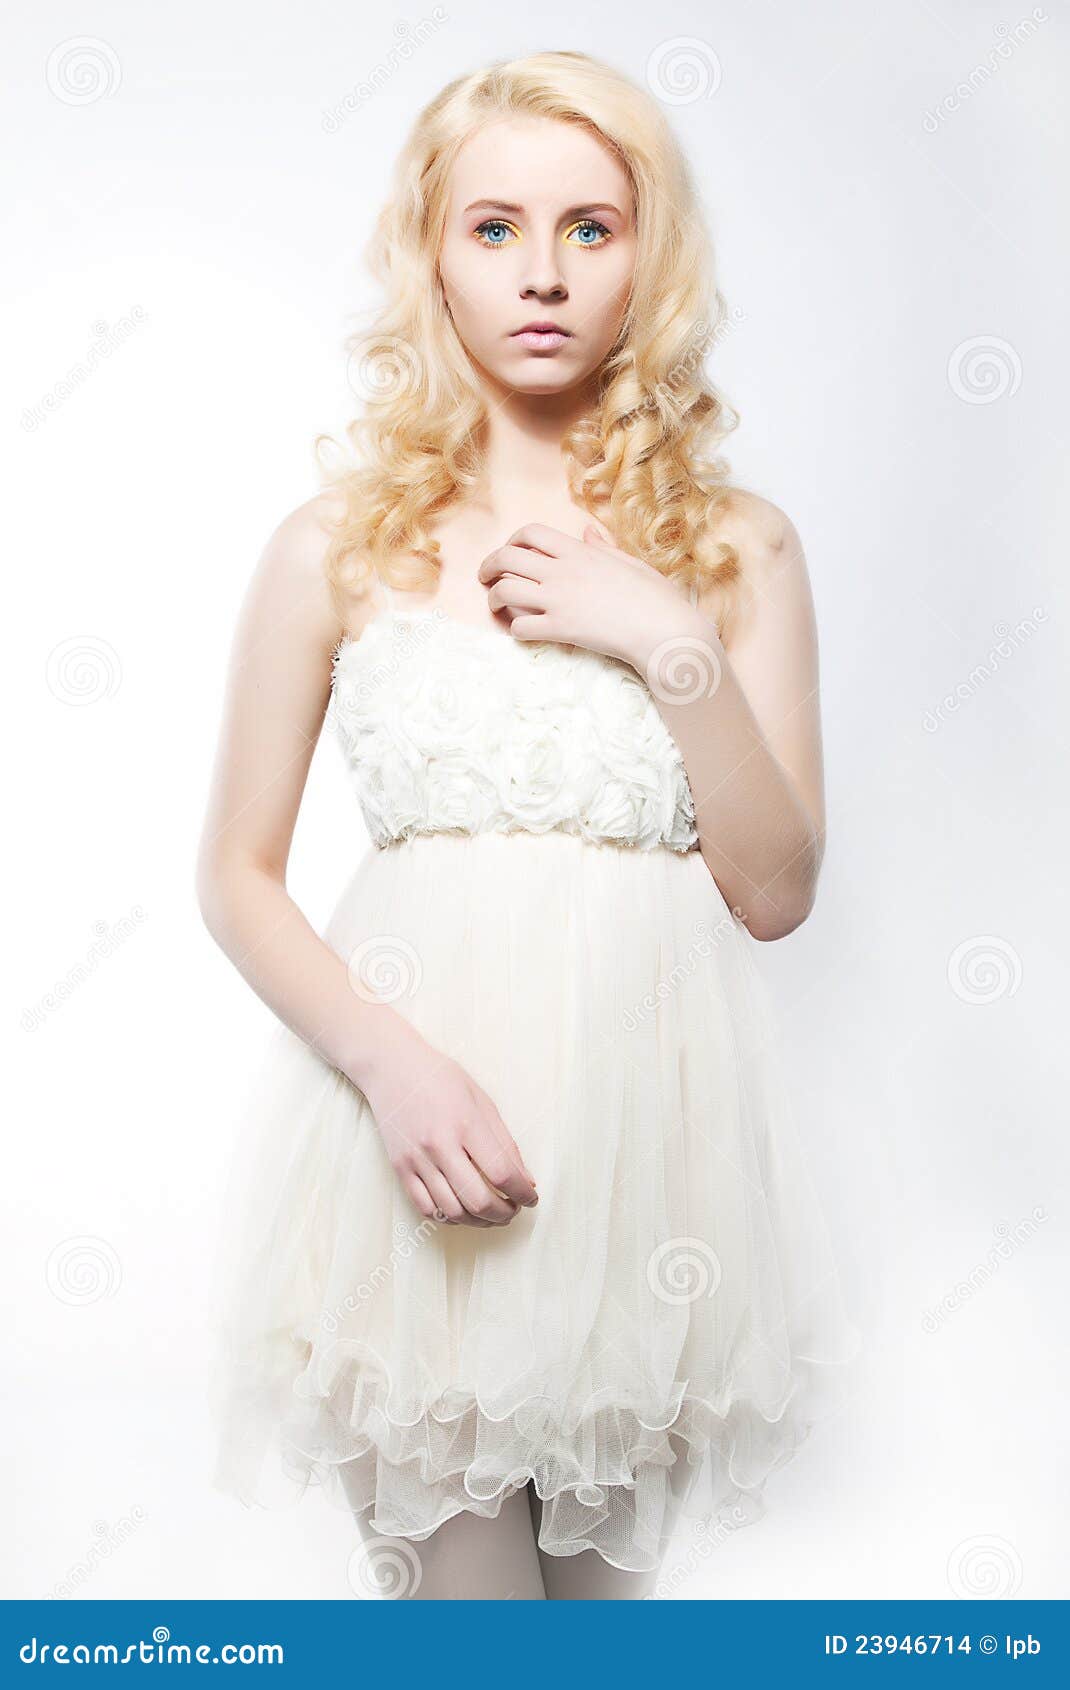 Sensual Female Blond Hair Isolated on White Stock Photo - Image of ...